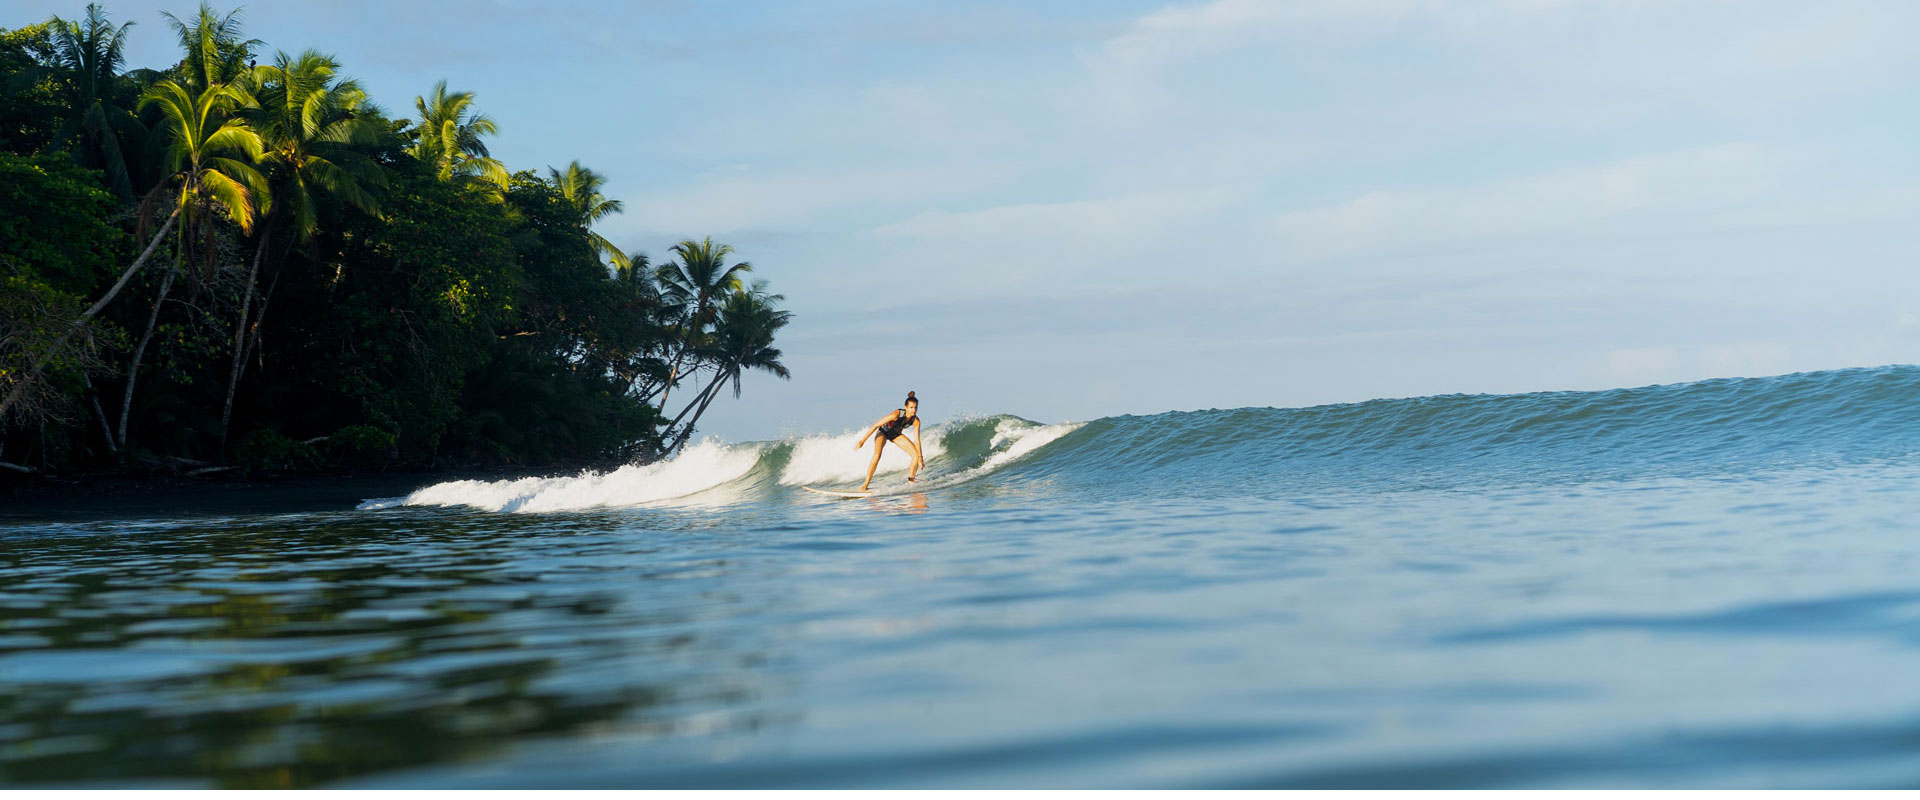 learn-to-surf-in-costa-rica